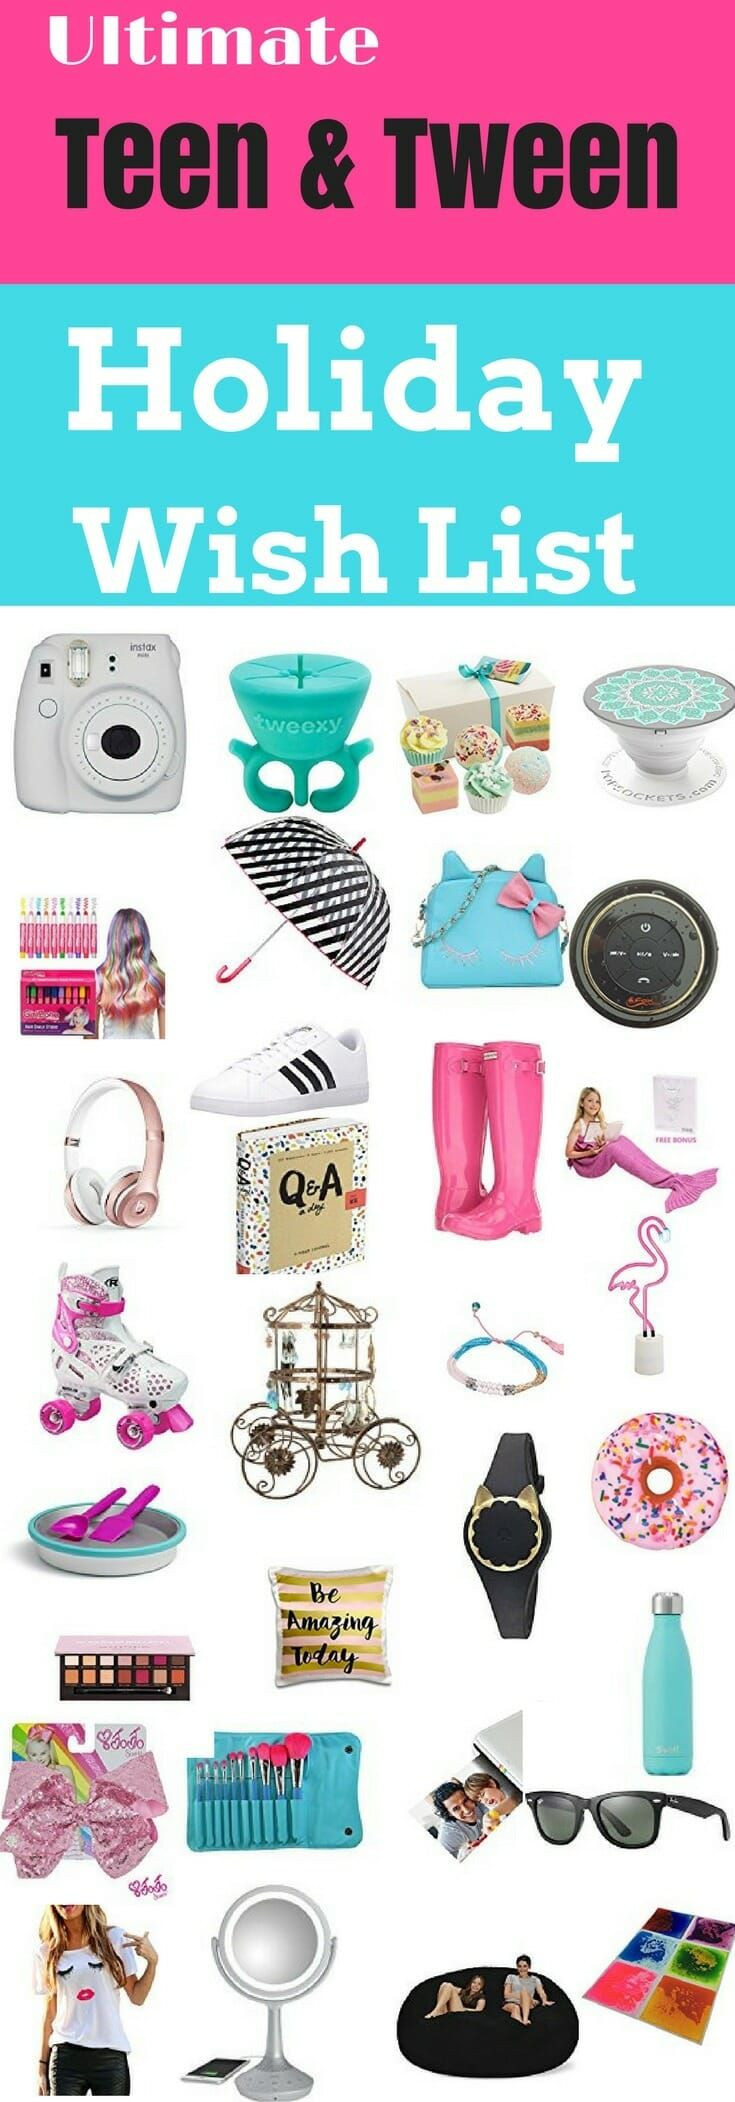 Cheap Gift Ideas For Girls
 Gifts for Teenage Girls Under $20 Affordable Christmas